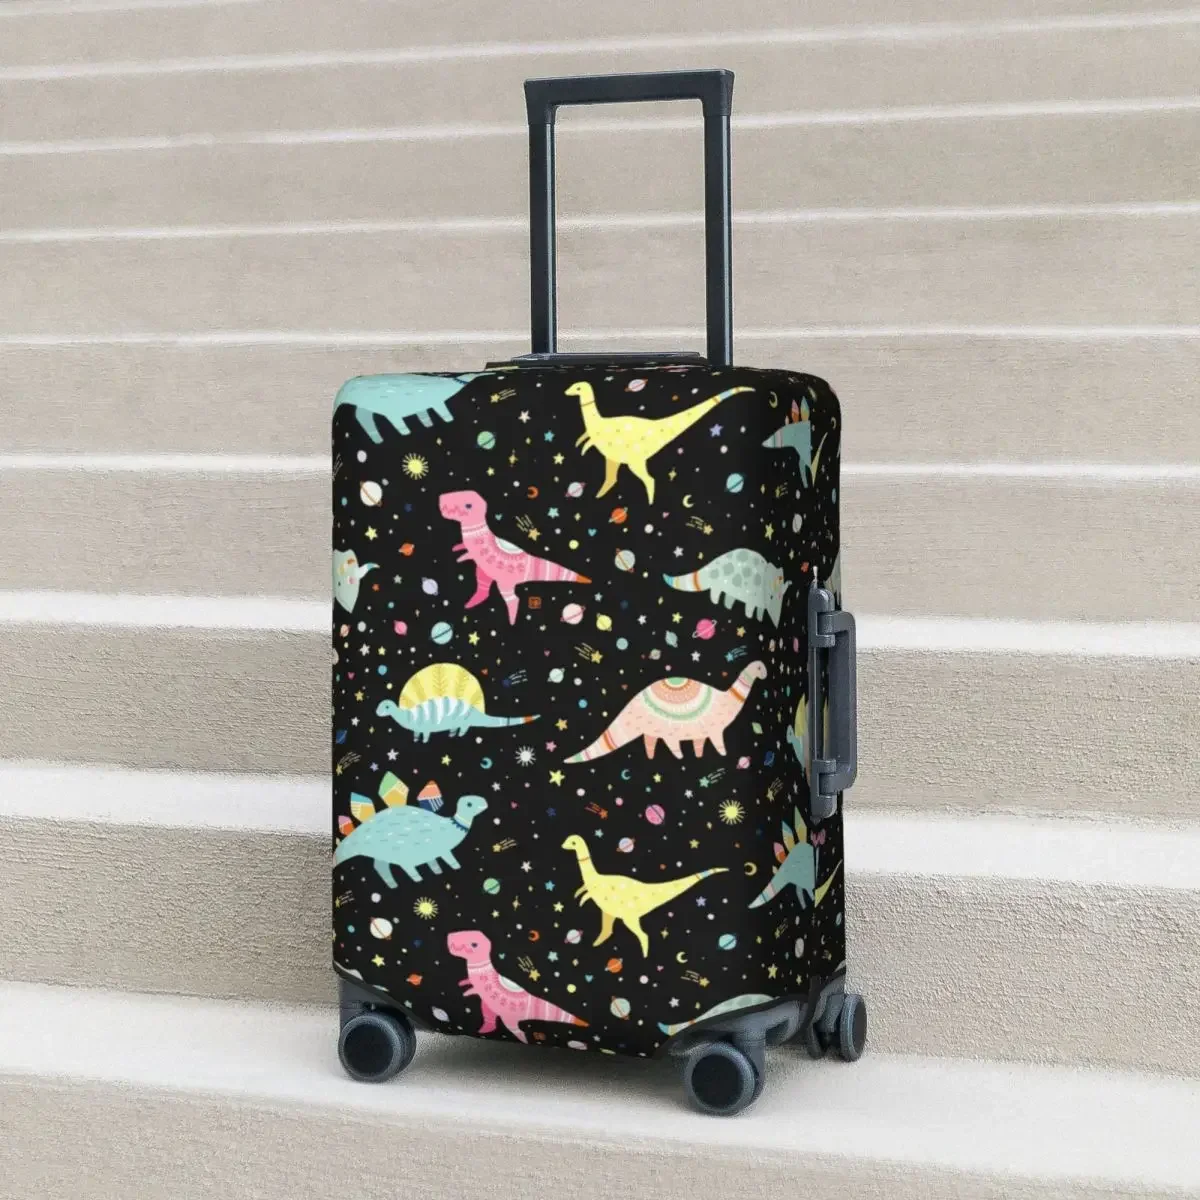 

Dinosaur Pattern Suitcase Cover Vacation Fantasy Star Kawaii Useful Luggage Accesories Cruise Trip Protection